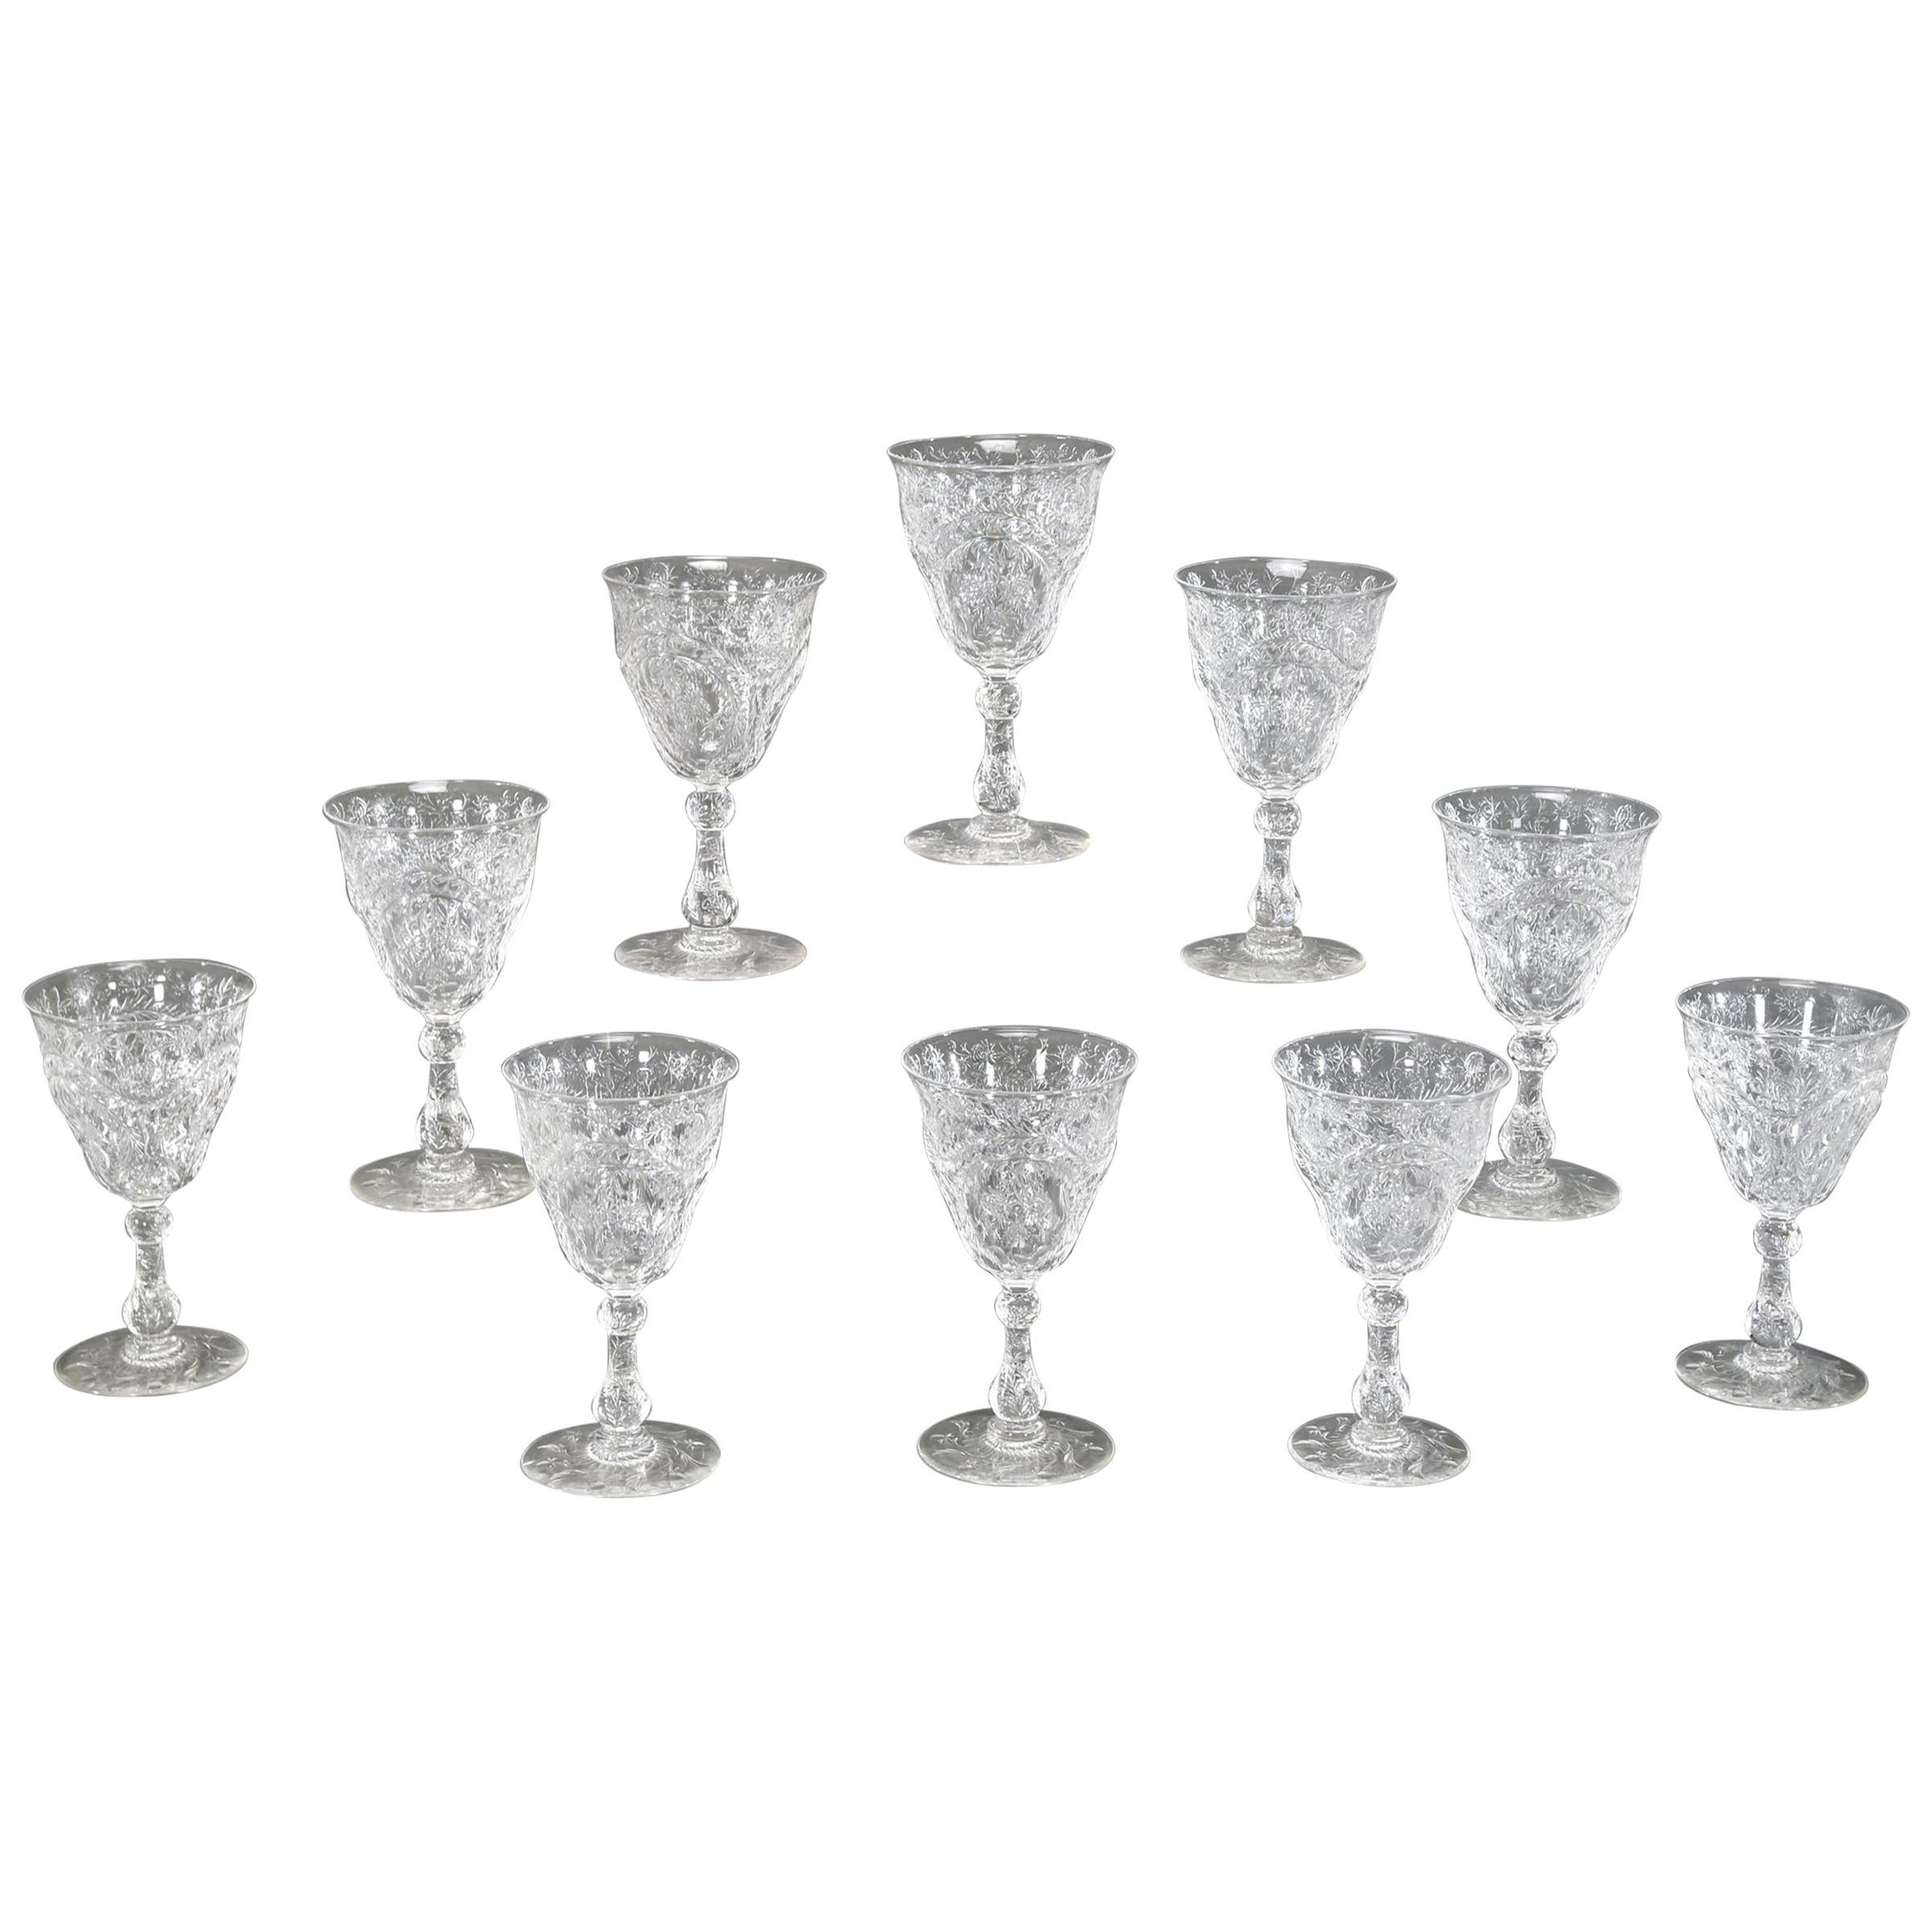 Set of 10 Webb Hand Blown Rock Crystal Engraved Goblets W/ Thistles Artichokes